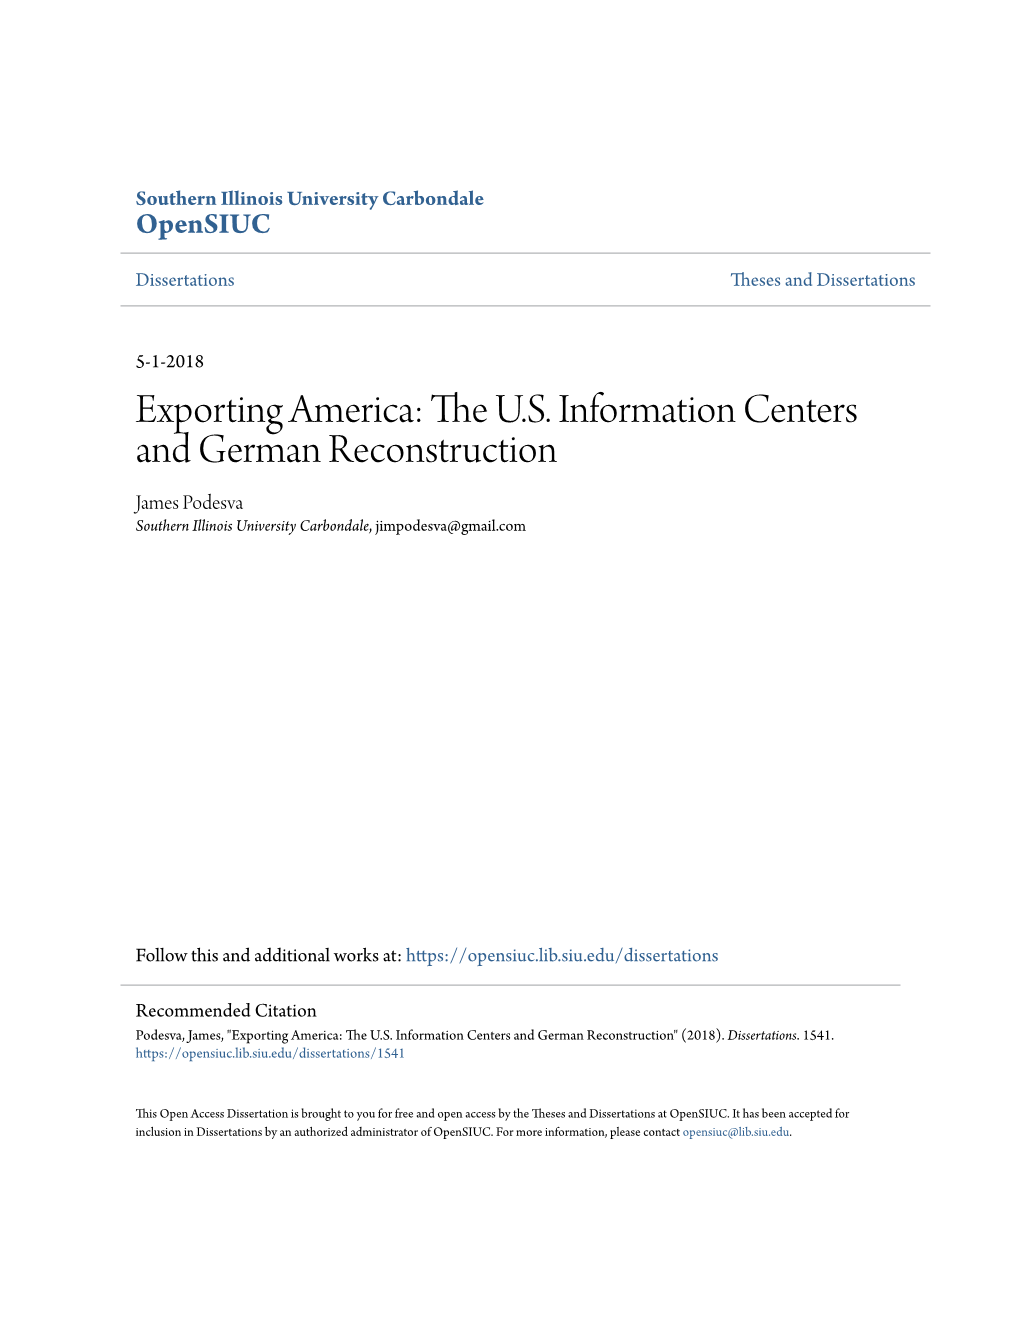 Exporting America: the U.S. Information Centers and German Reconstruction